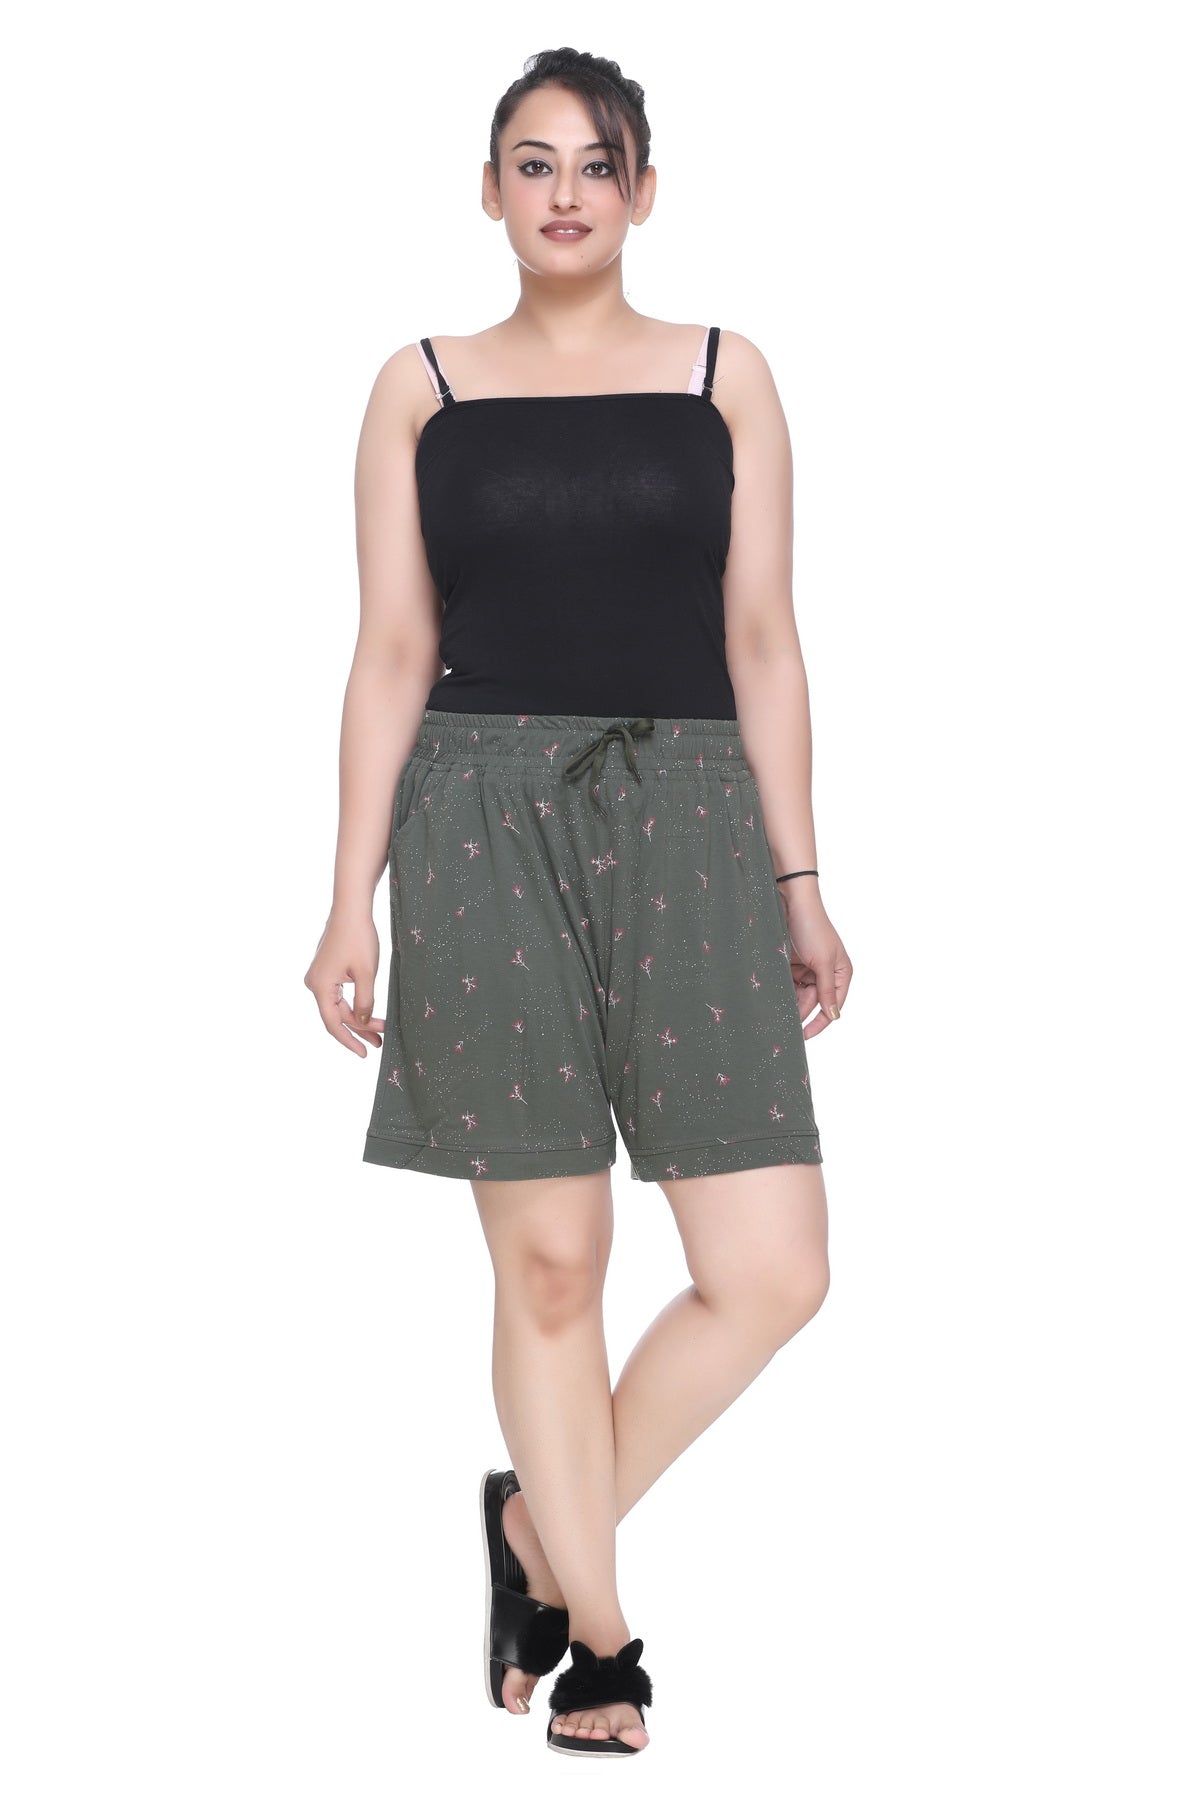 Plus Size Cotton Shorts For Women - Printed Bermuda - Olive Green